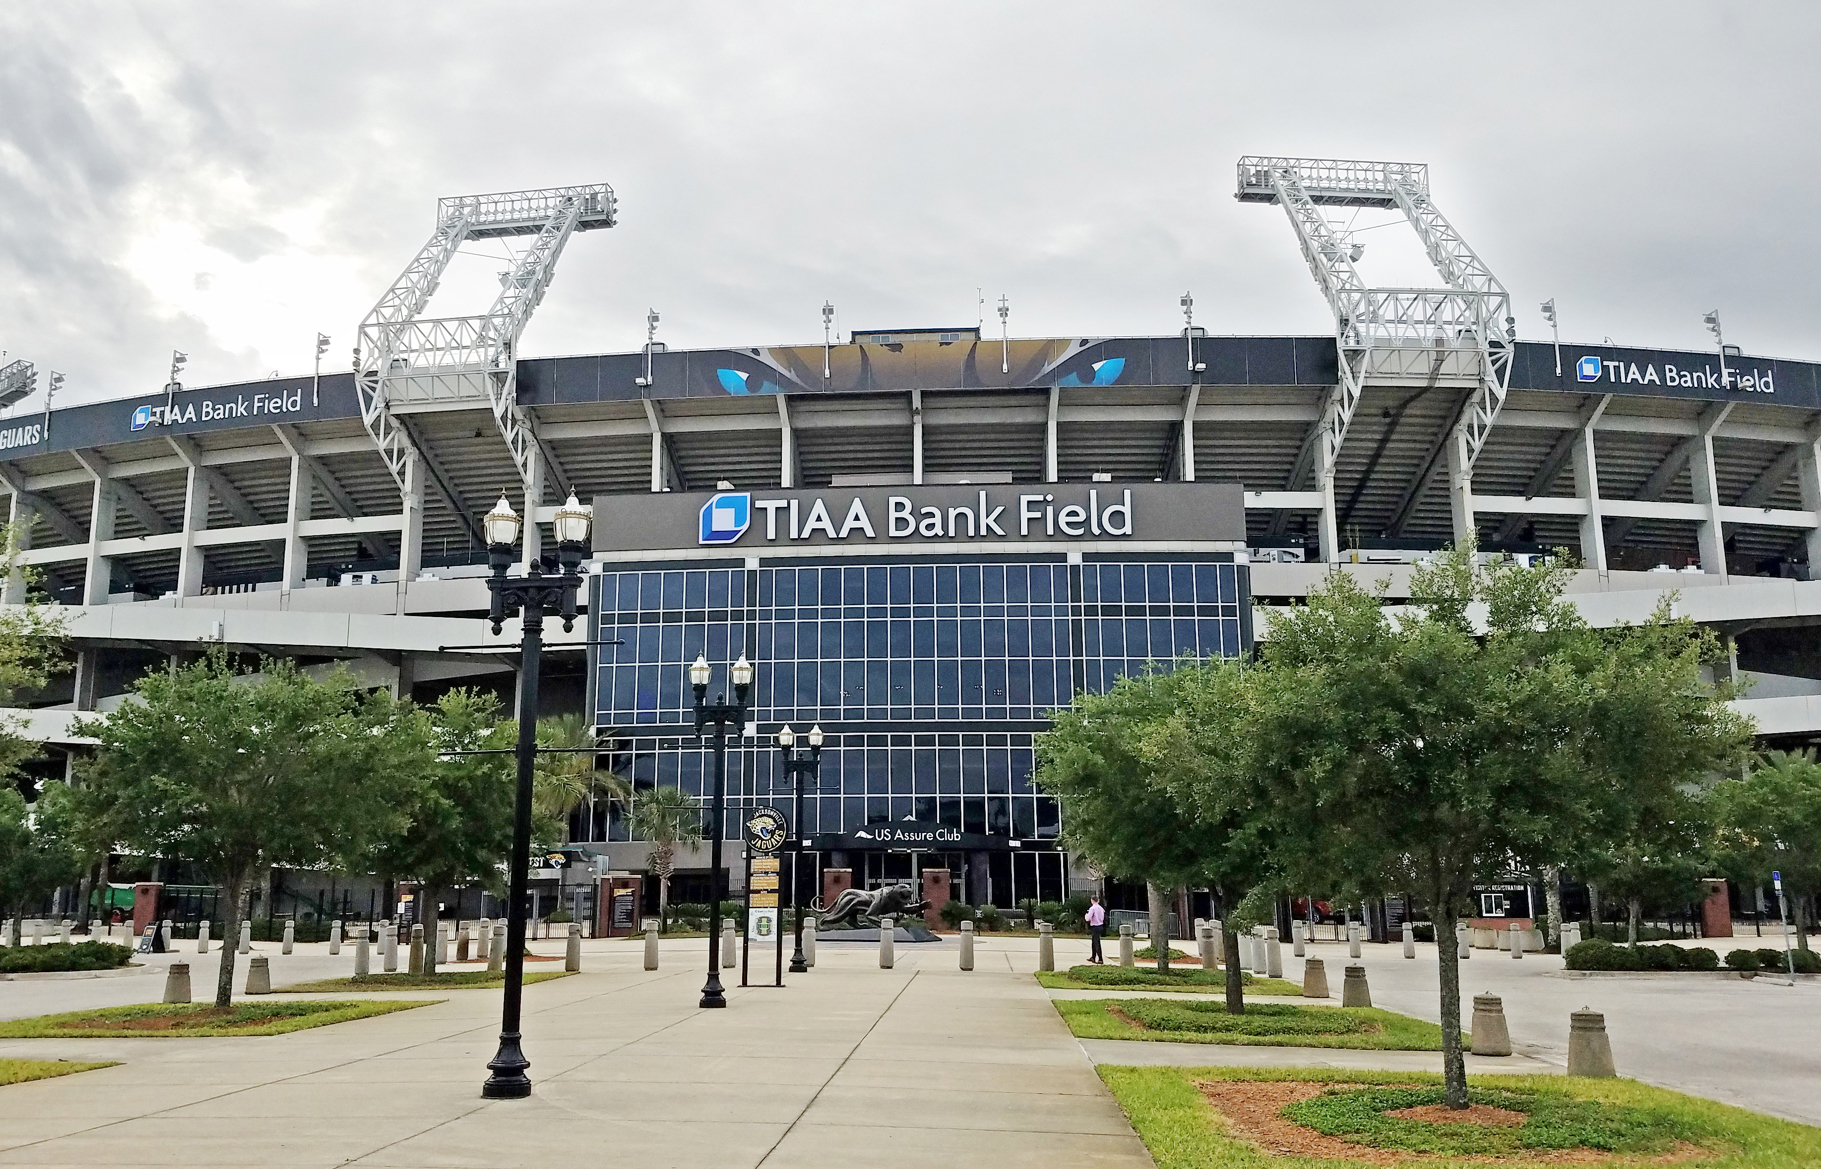 TIAA Bank Field will be getting a new name, but that won’t happen during the 2022 football season.